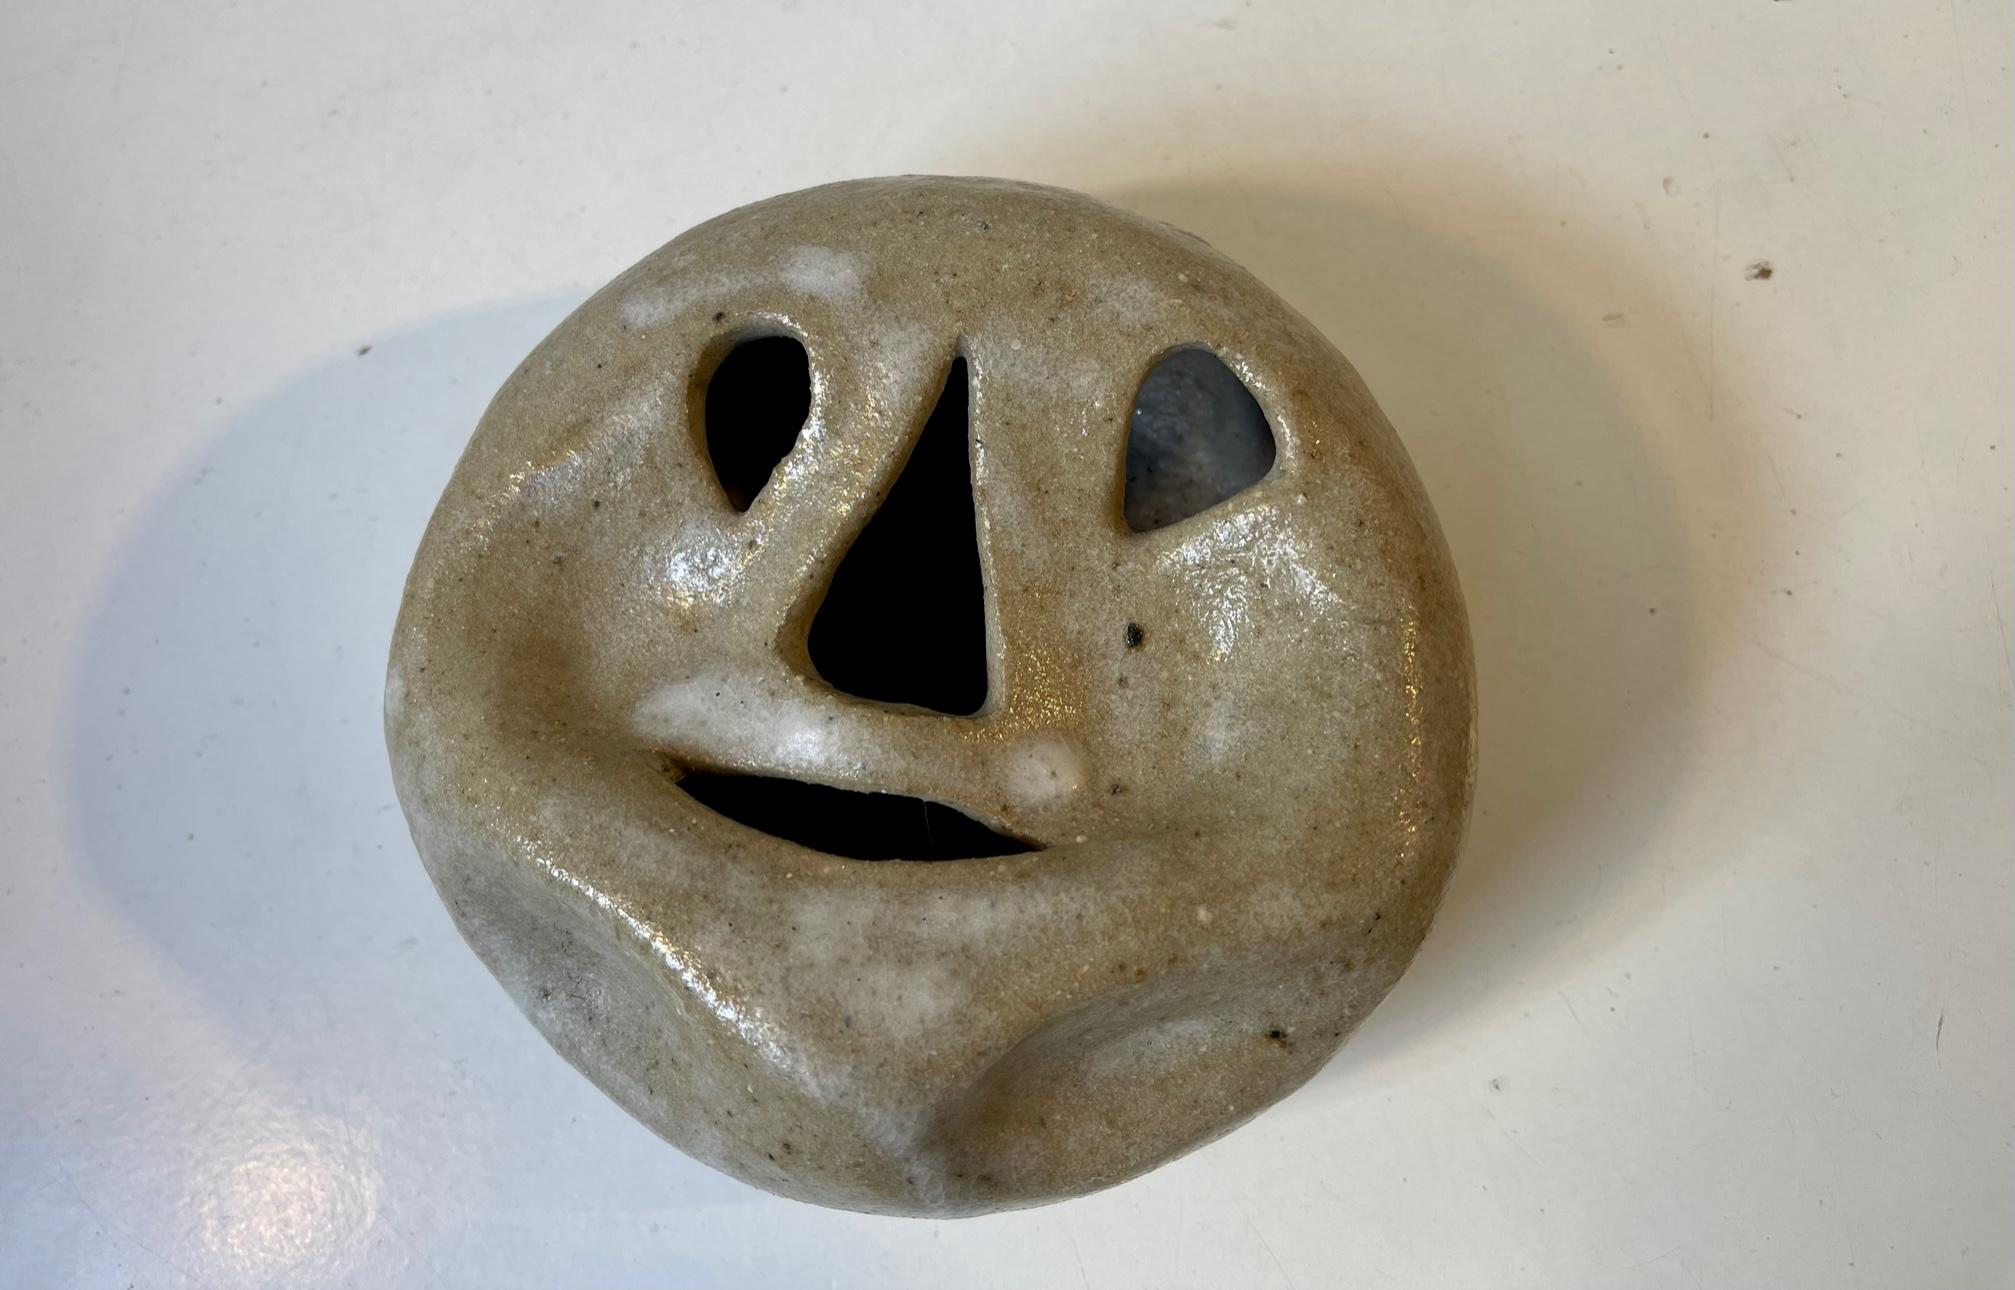 Collapsed face vase or wall plaque in salt glazed stoneware. Interesting naive almost surreal expression. Its a piece unique studio made by the Danish ceramist Gunner Michael Andersen. It comparable to similar pieces by Erik Graeser and Aage Würtz.